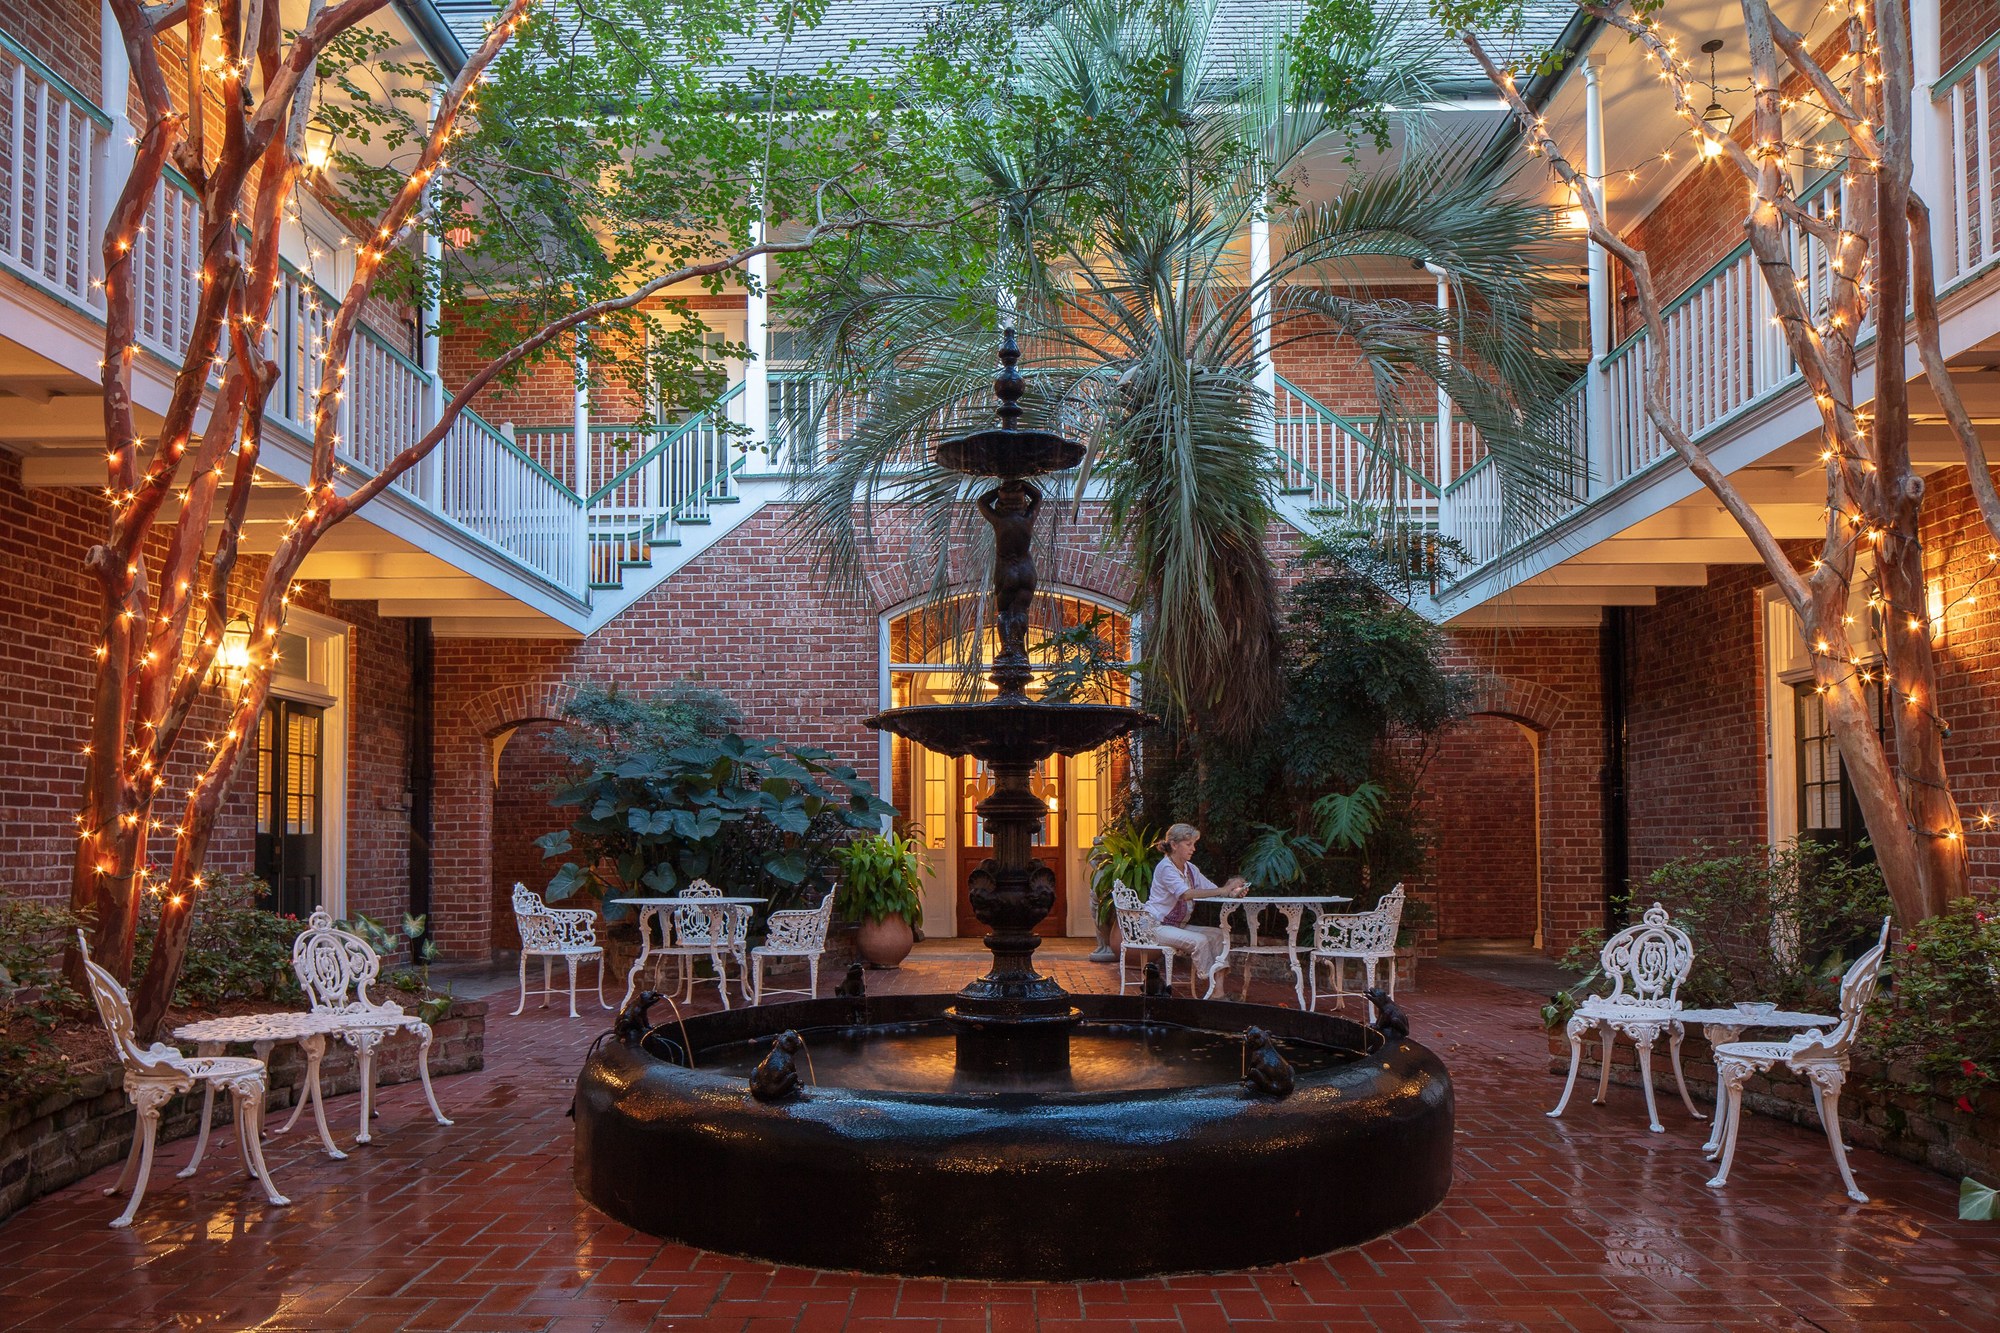 Hotel Provincial, New Orleans French Quarter